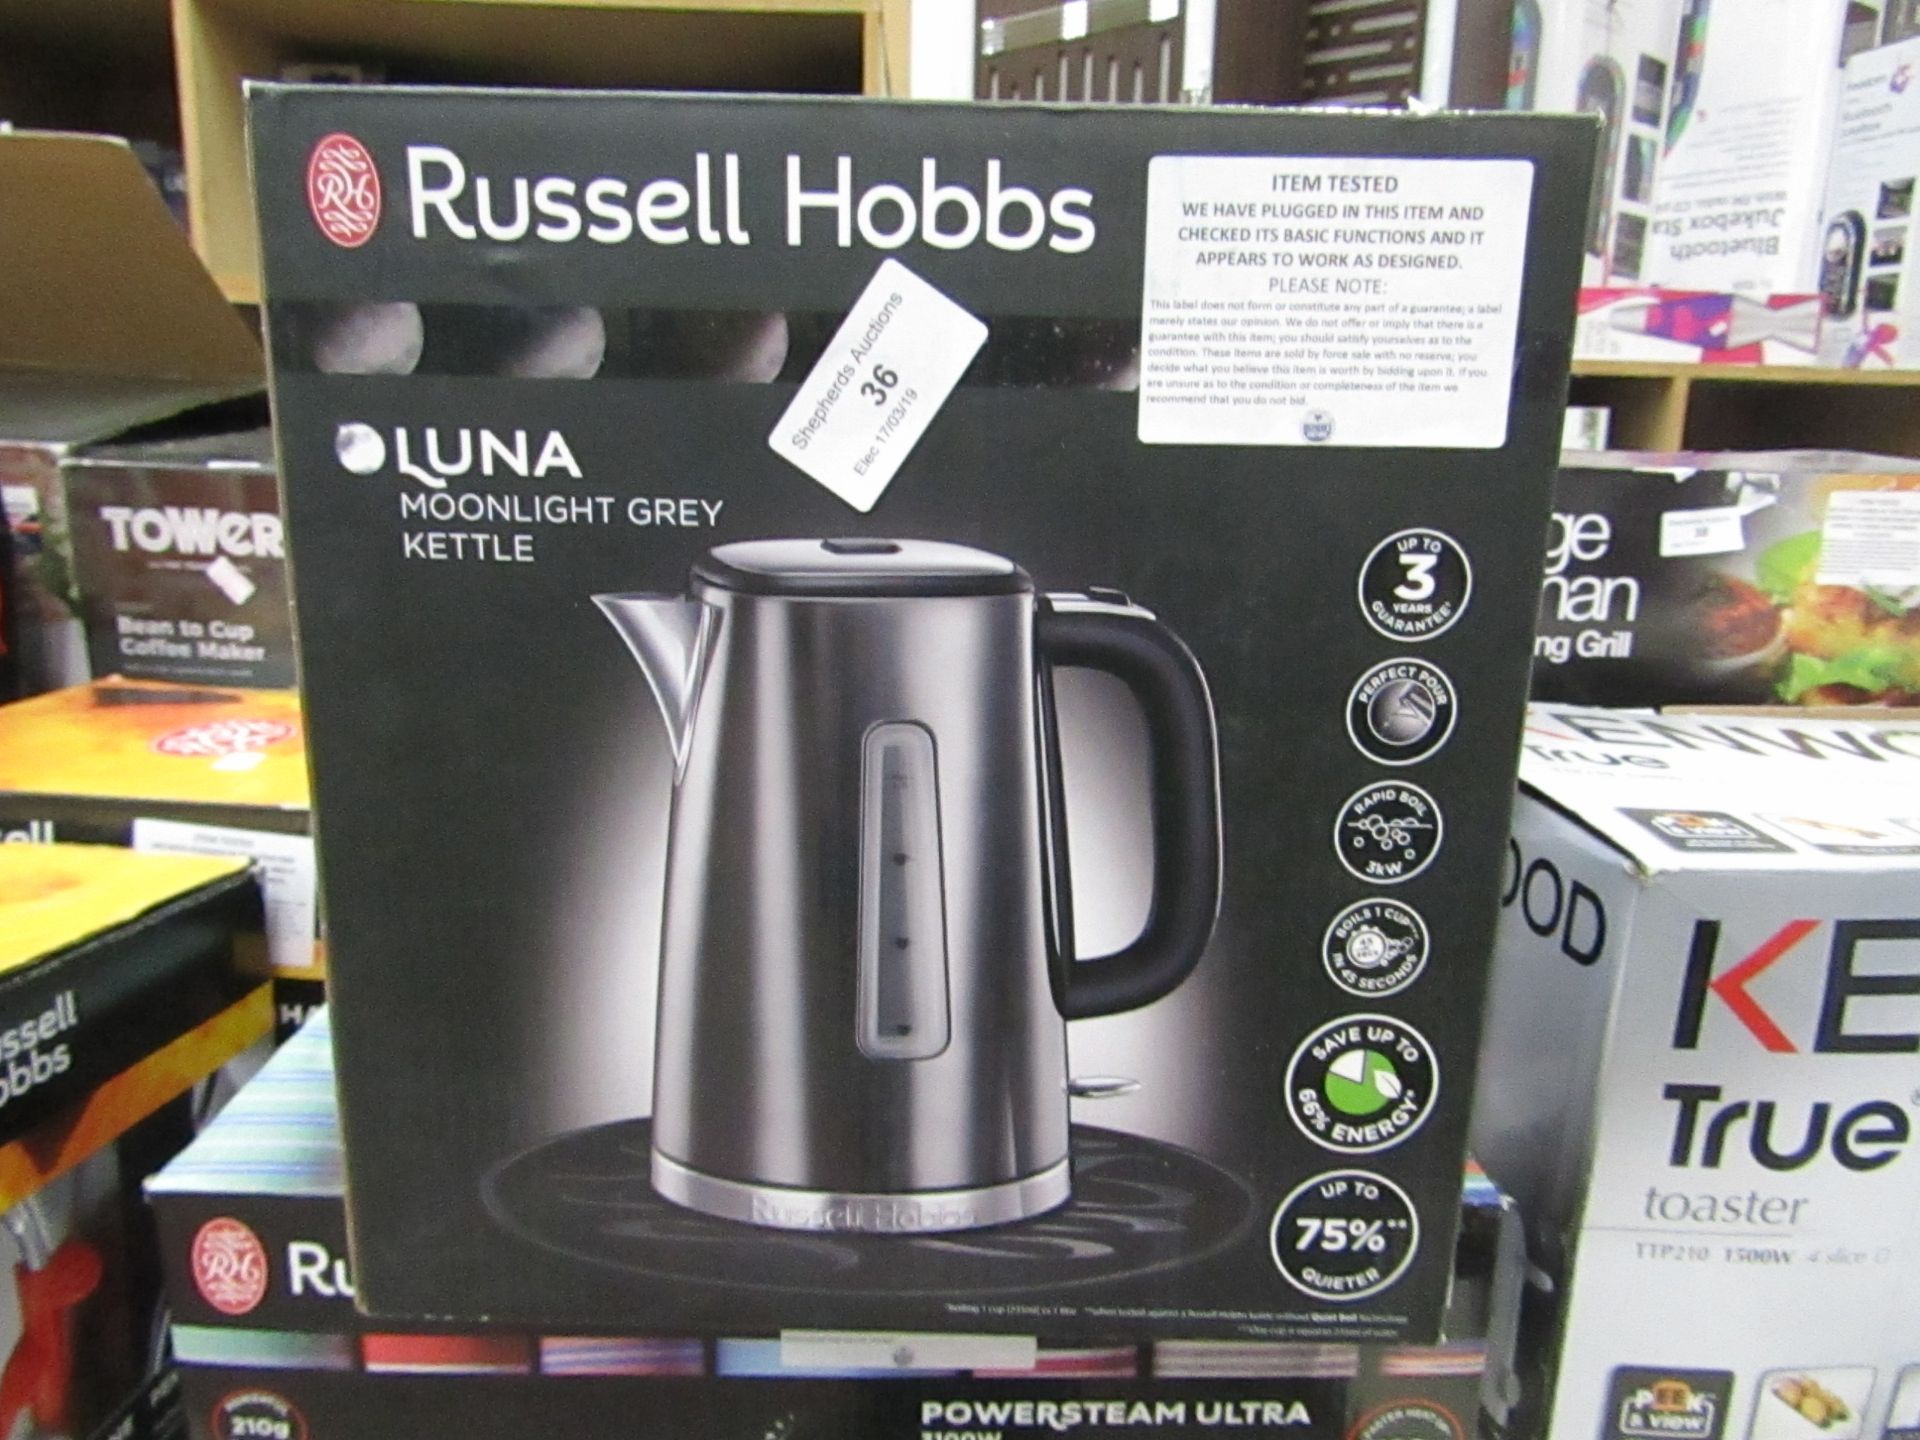 Russell Hobbs Luna kettle, tested working and boxed